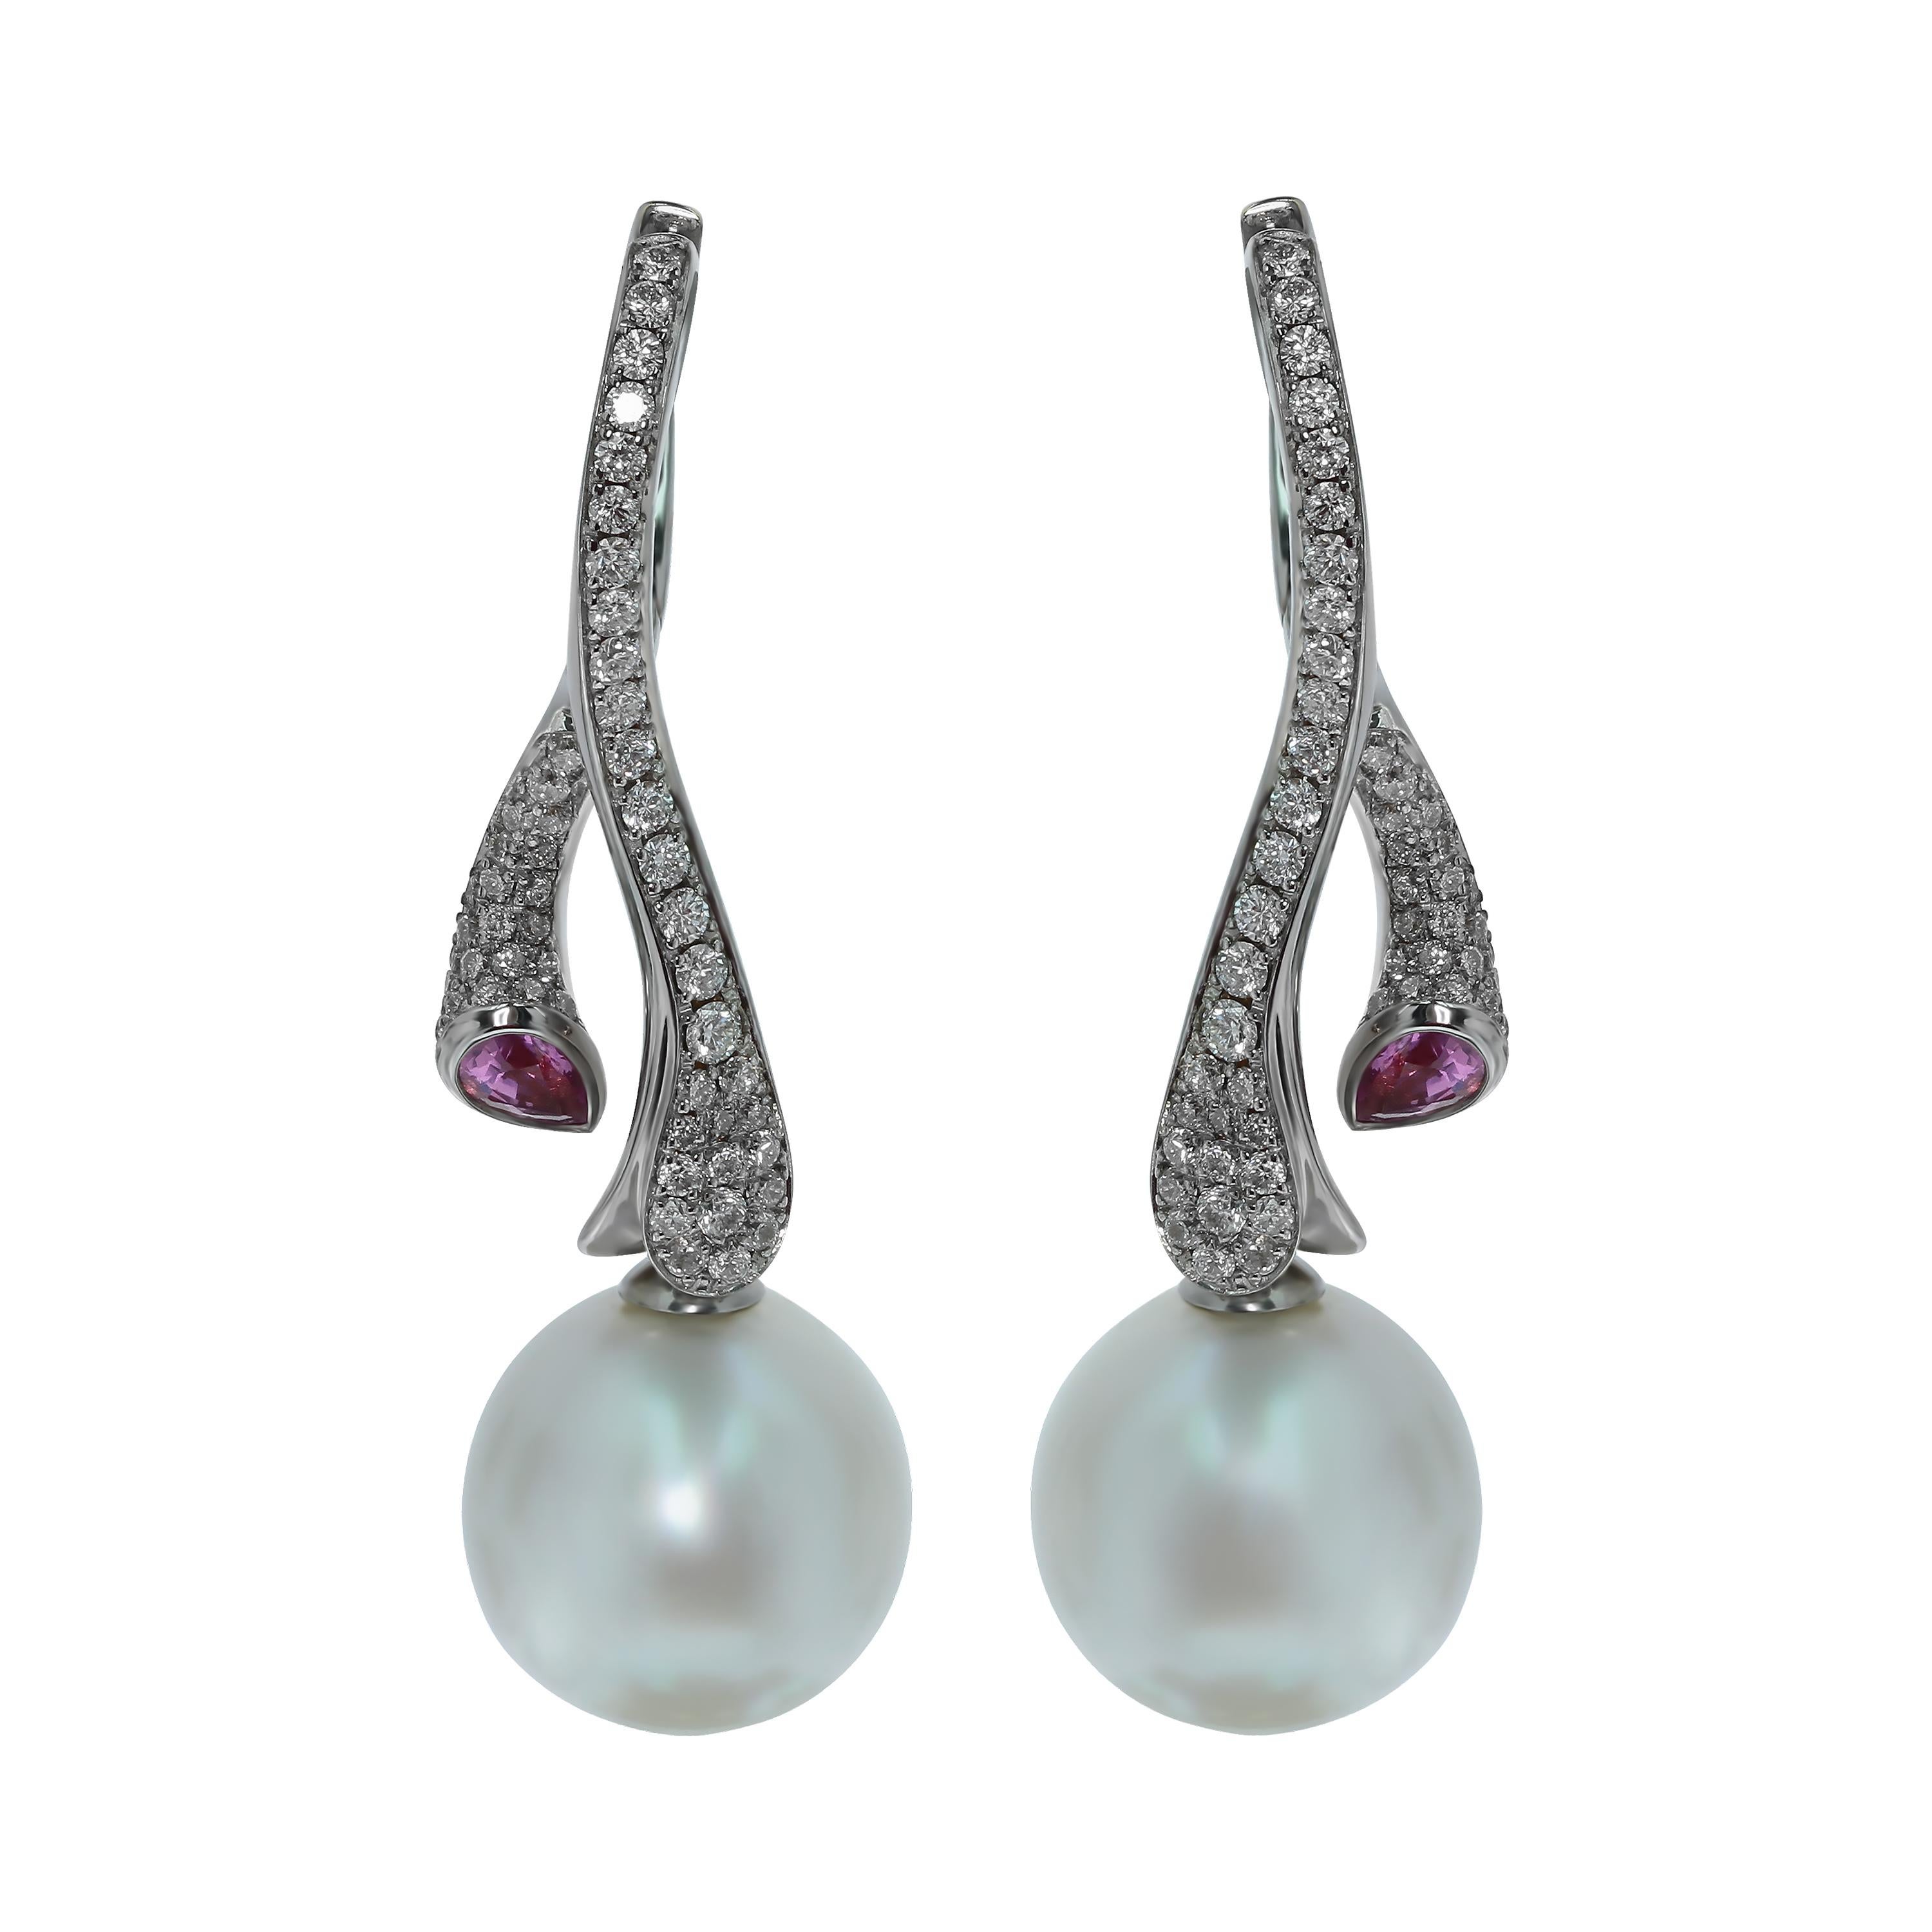 Diamonds Pink Sapphire South Sea Pearl  18 Karat White Gold Earrings
Earrings are made in water theme. 108 Diamonds totaling 1.13 Carat on the White 18K Gold remind the sea foam that escorts us to the bottom of the ocean to two incredible South Sea